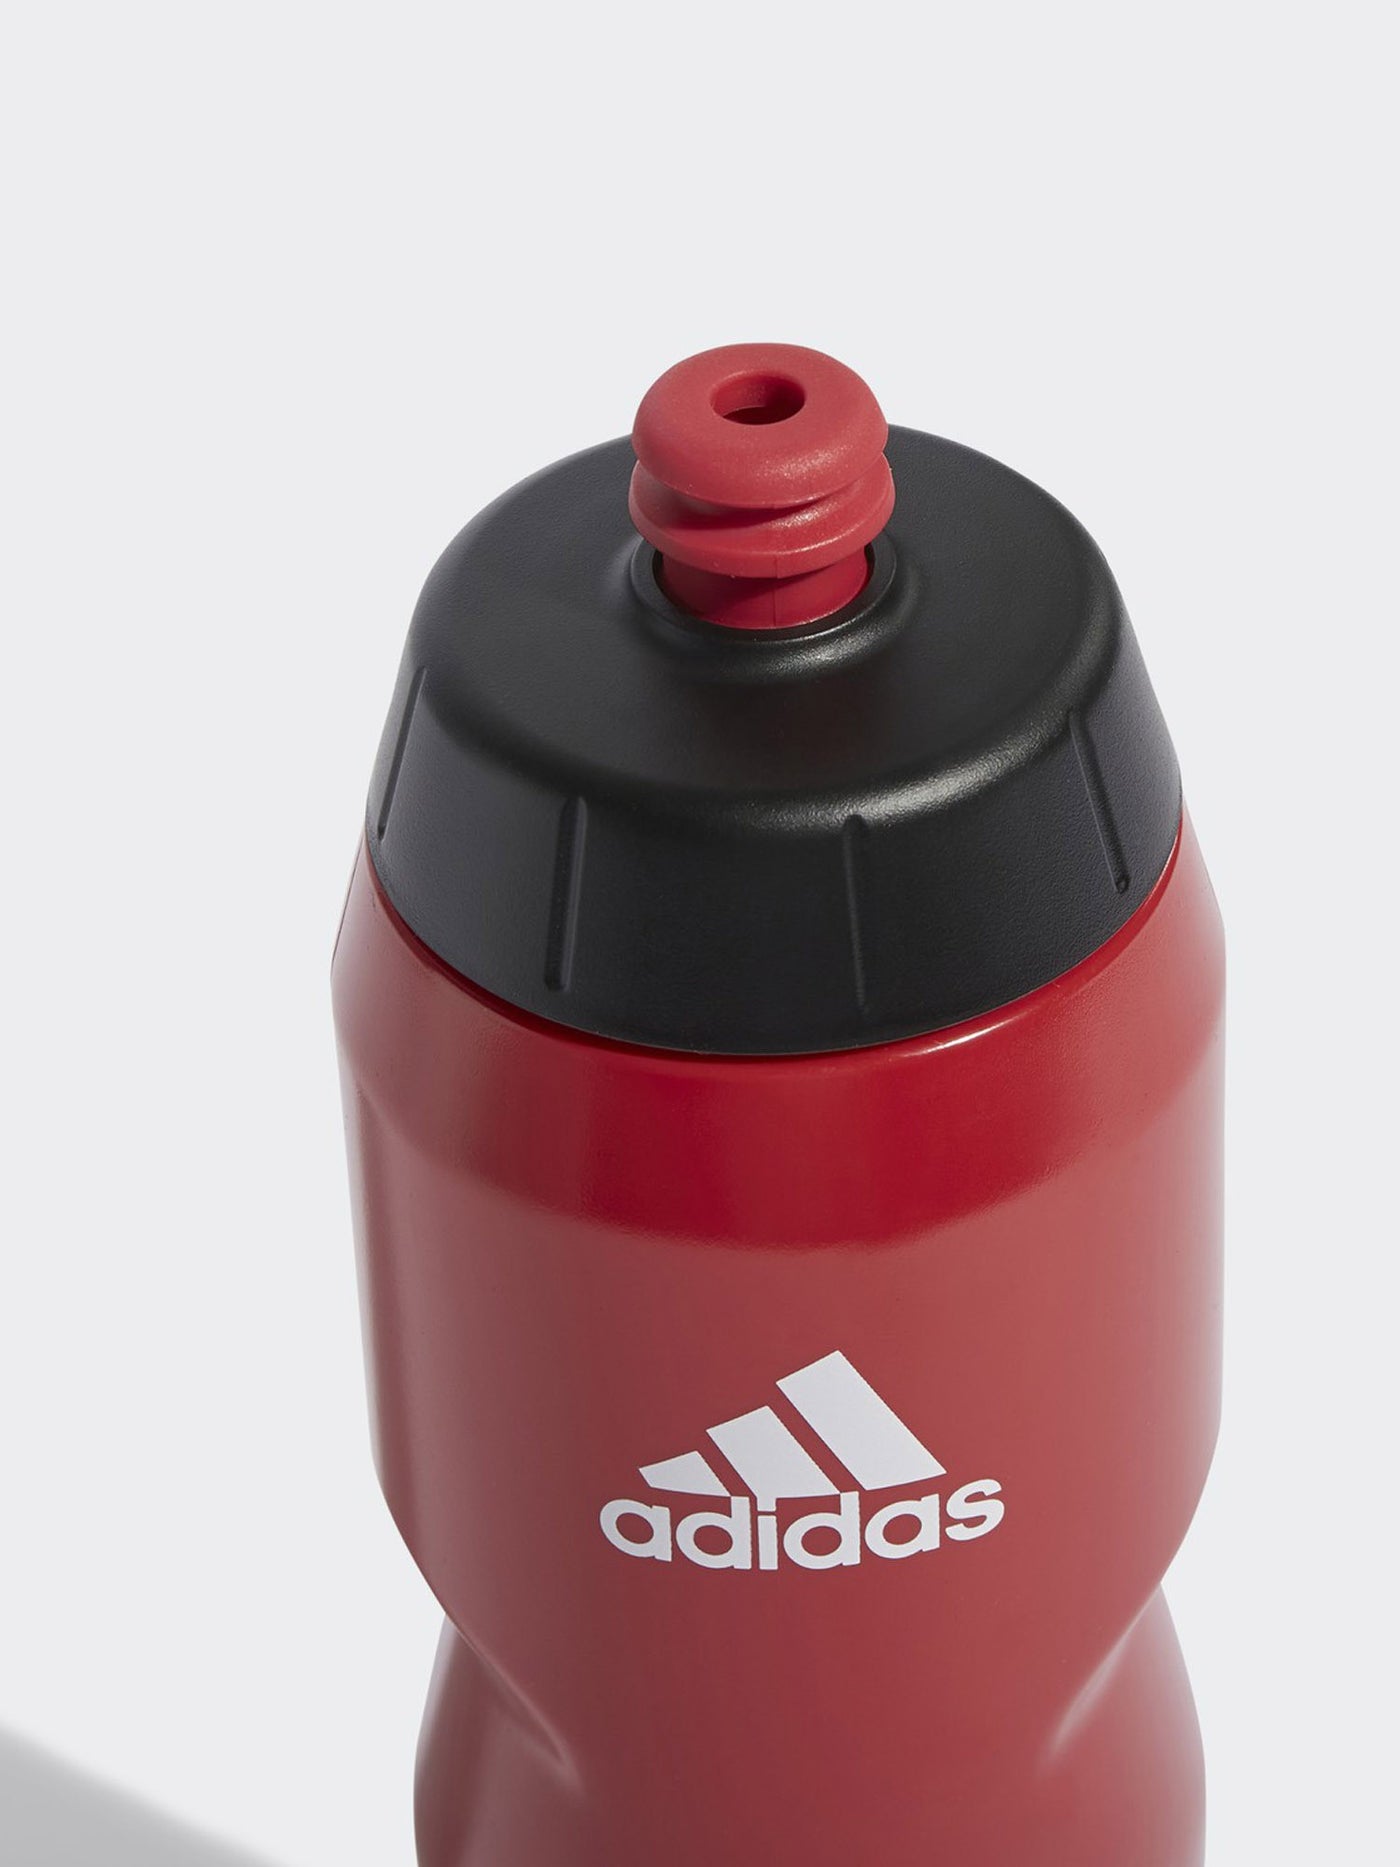 Manchester United Water Bottle